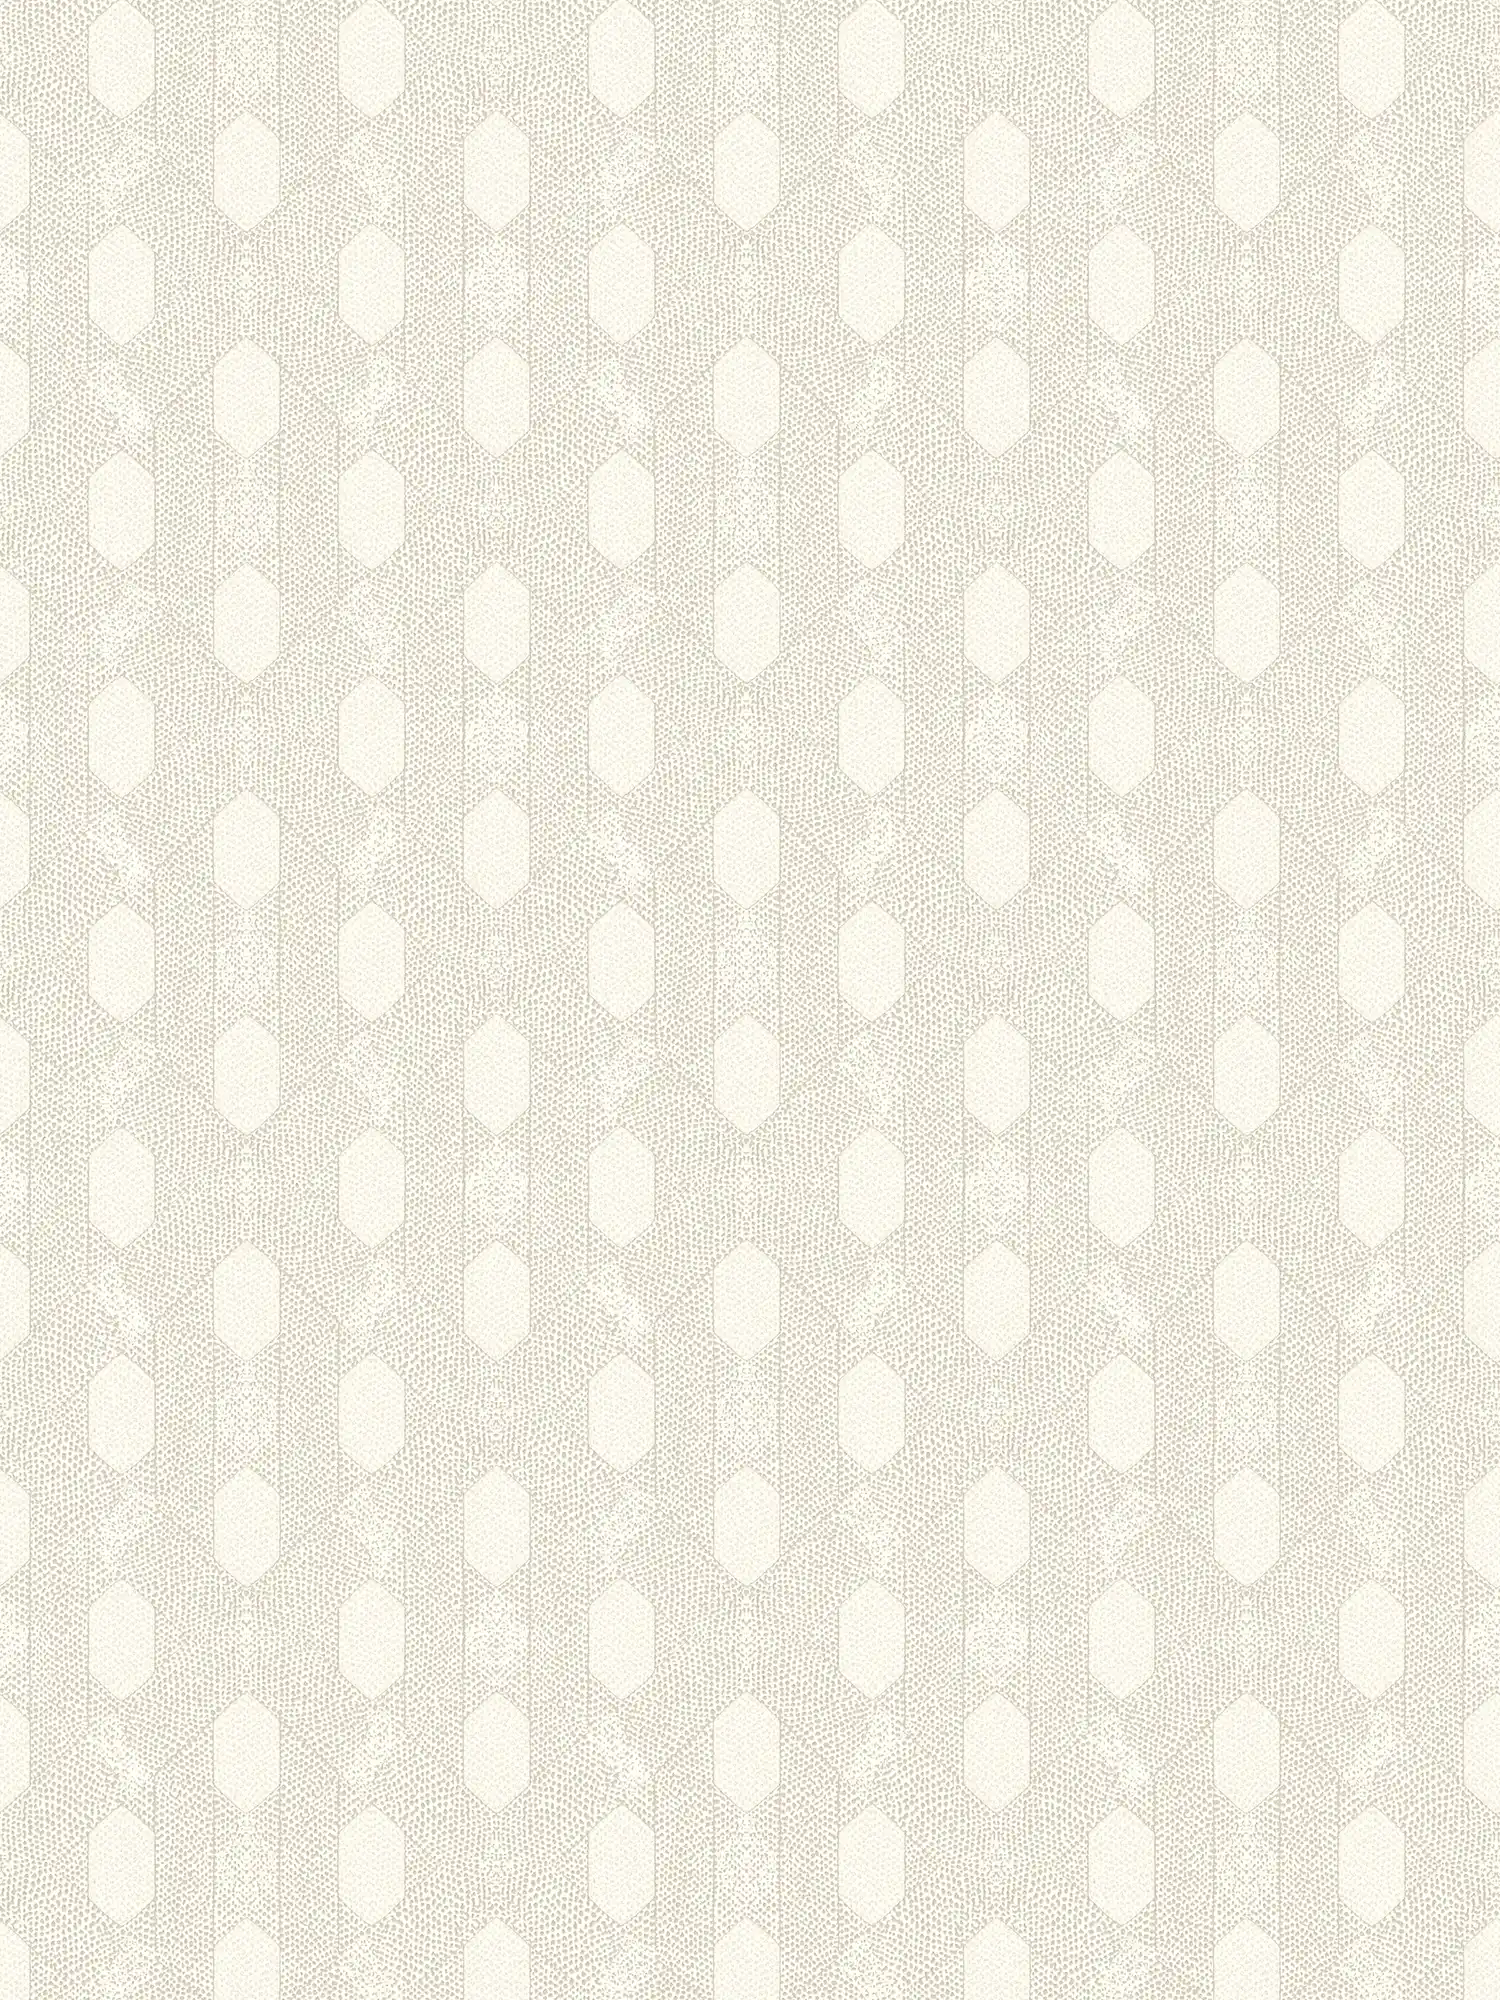 Non-woven wallpaper with geometric dots pattern - grey, gold, cream
